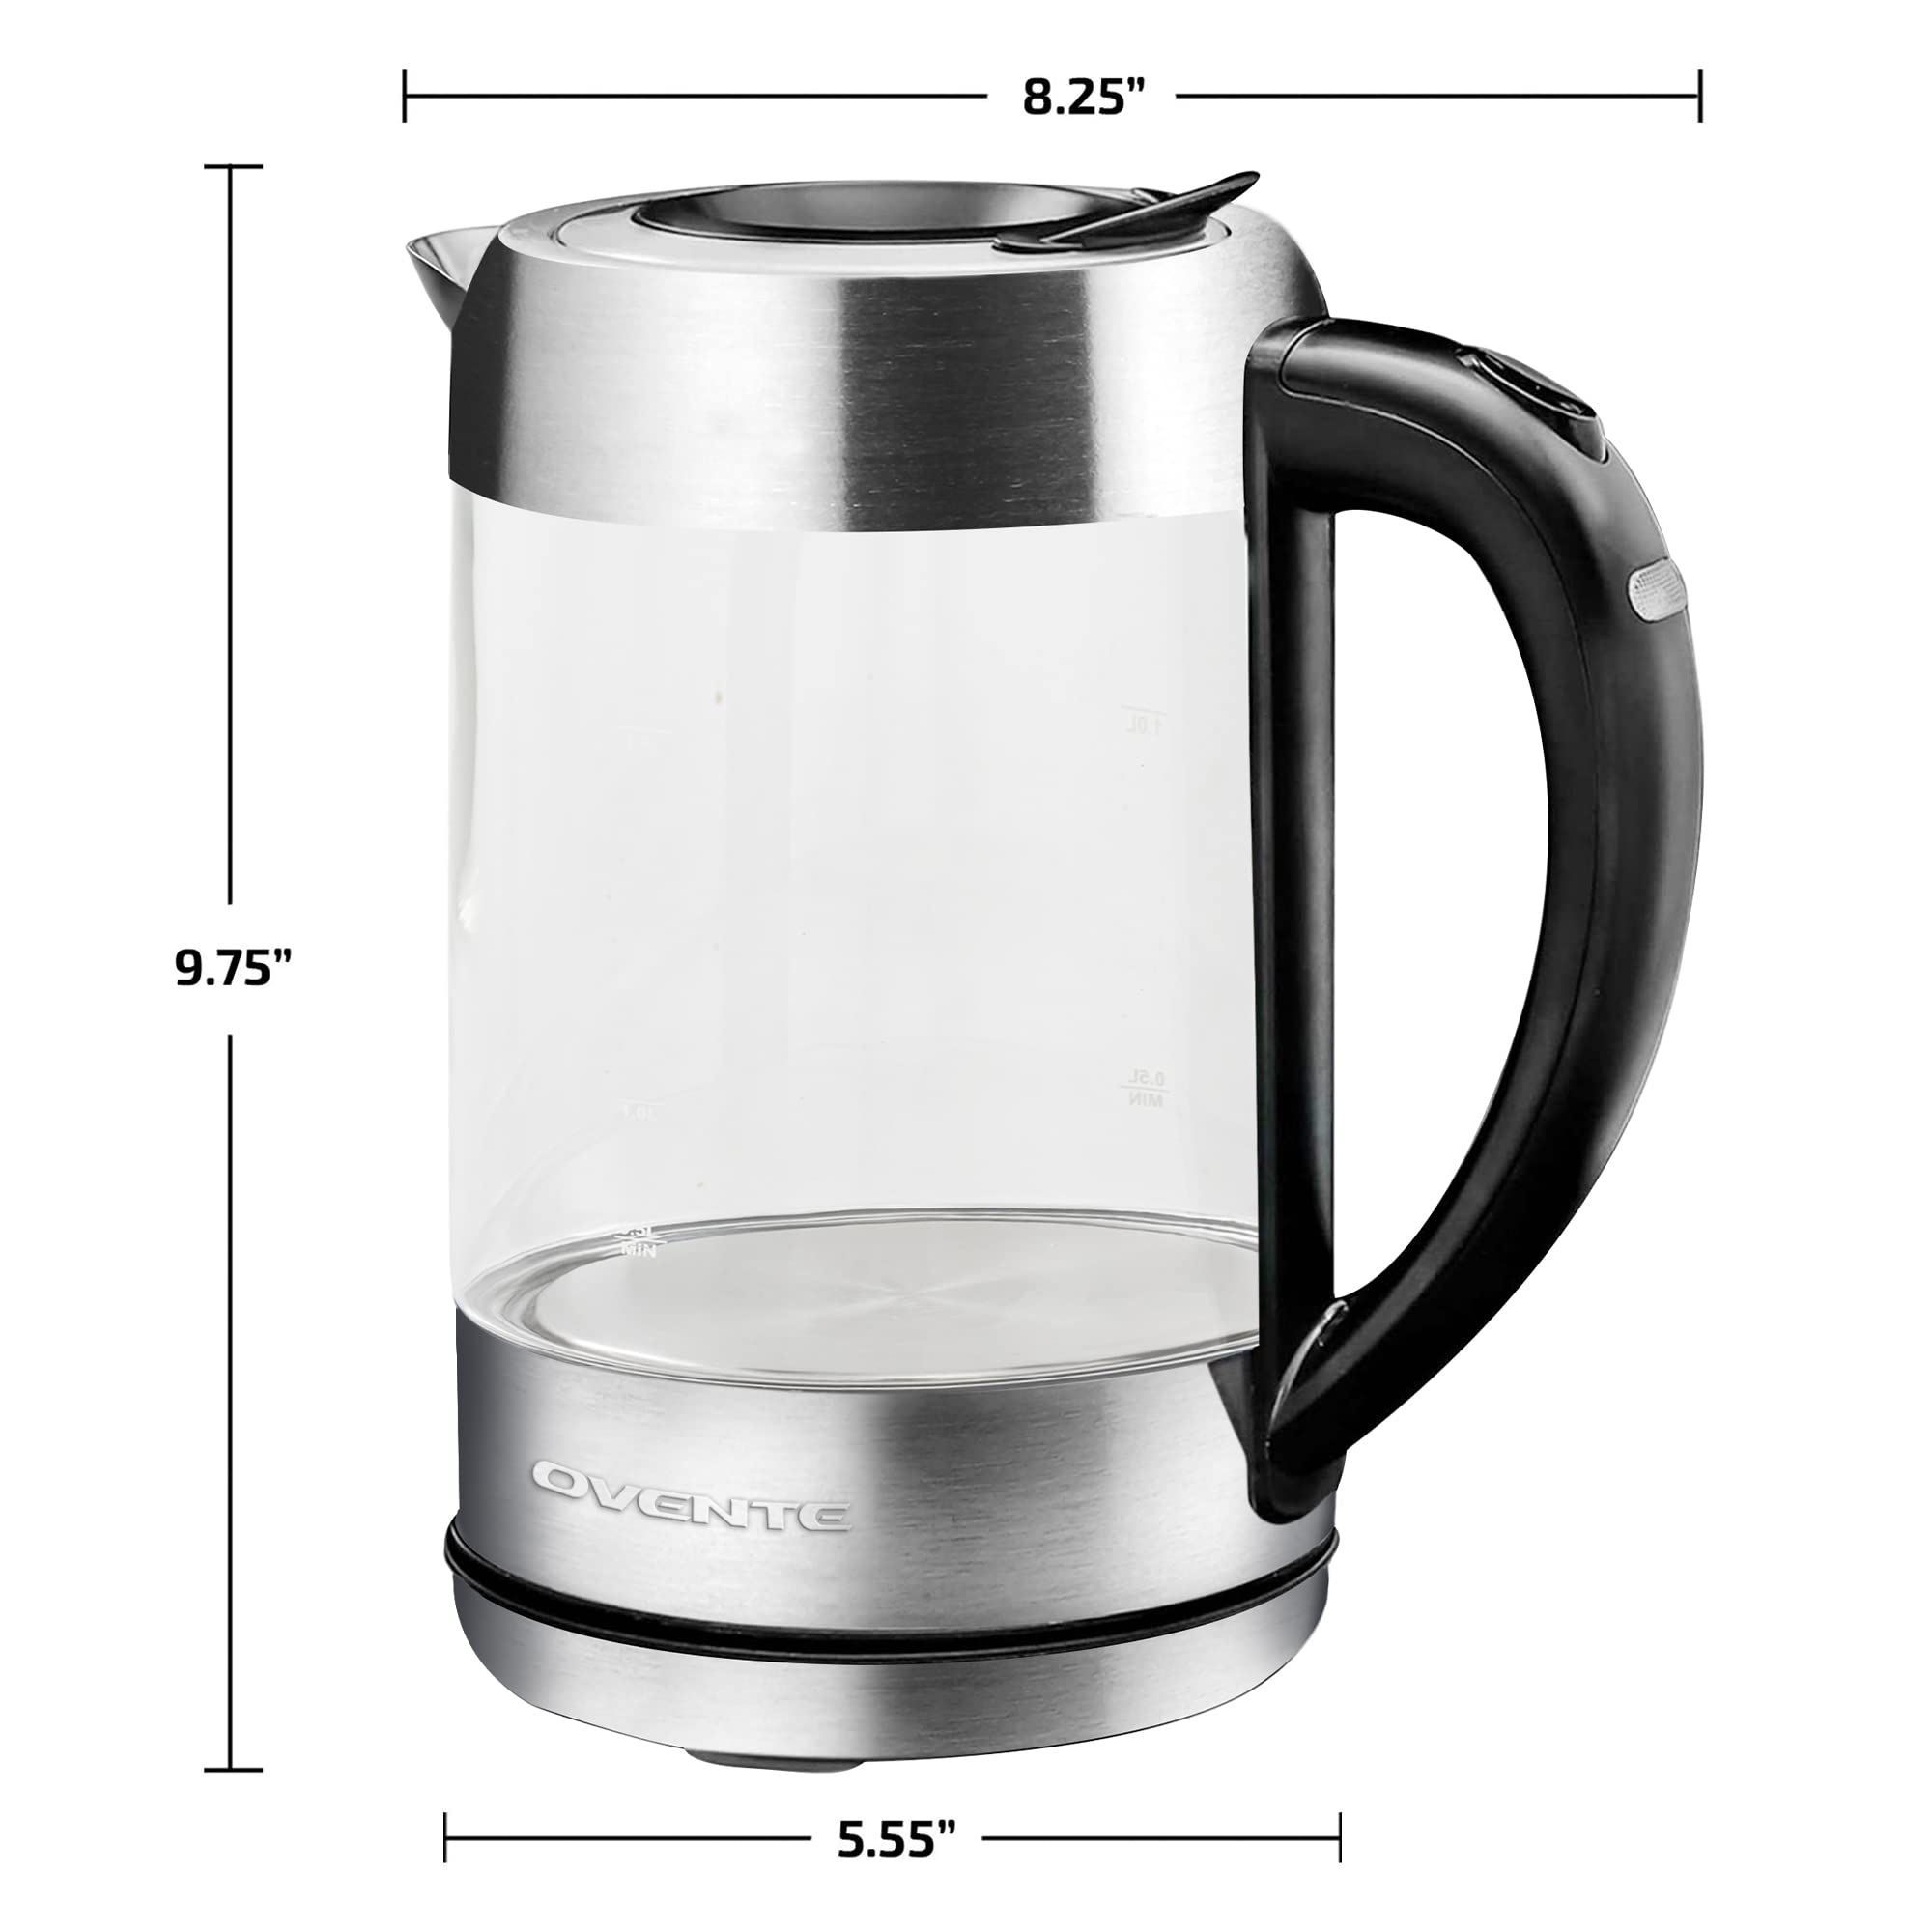 OVENTE Glass Electric Kettle Hot Water Boiler 1.7 Liter ProntoFill Tech w/ Stainless Steel Filter - 1500W BPA Free Cordless Instant Water Heater Kettle for Coffee & Tea Maker - Silver KG612S